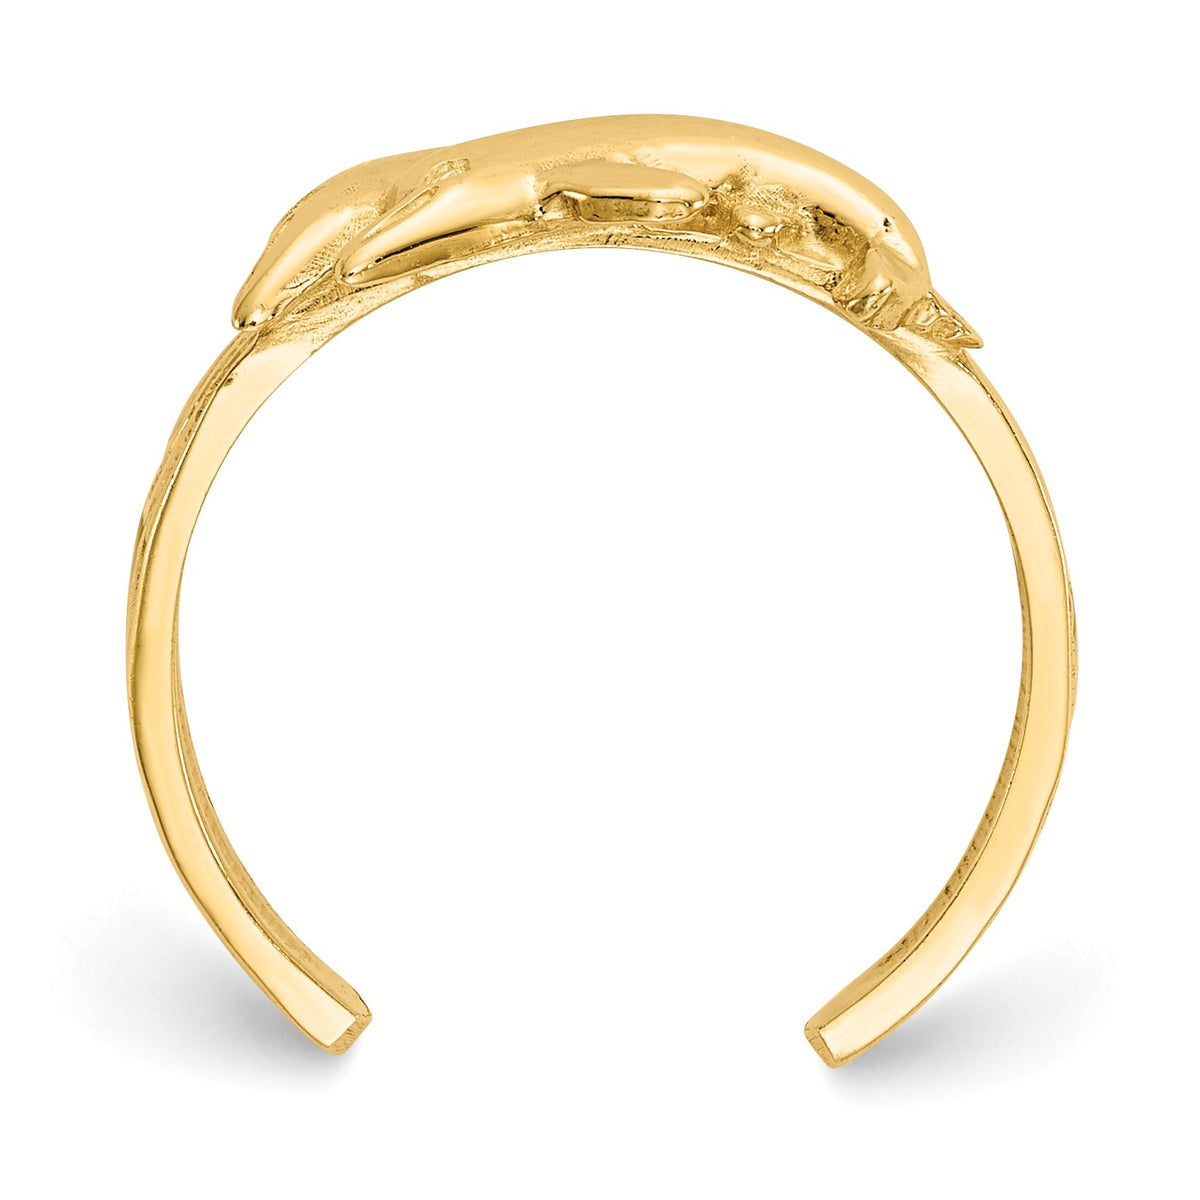 Alternate view of the Dolphins Toe Ring in 14 Karat Gold by The Black Bow Jewelry Co.